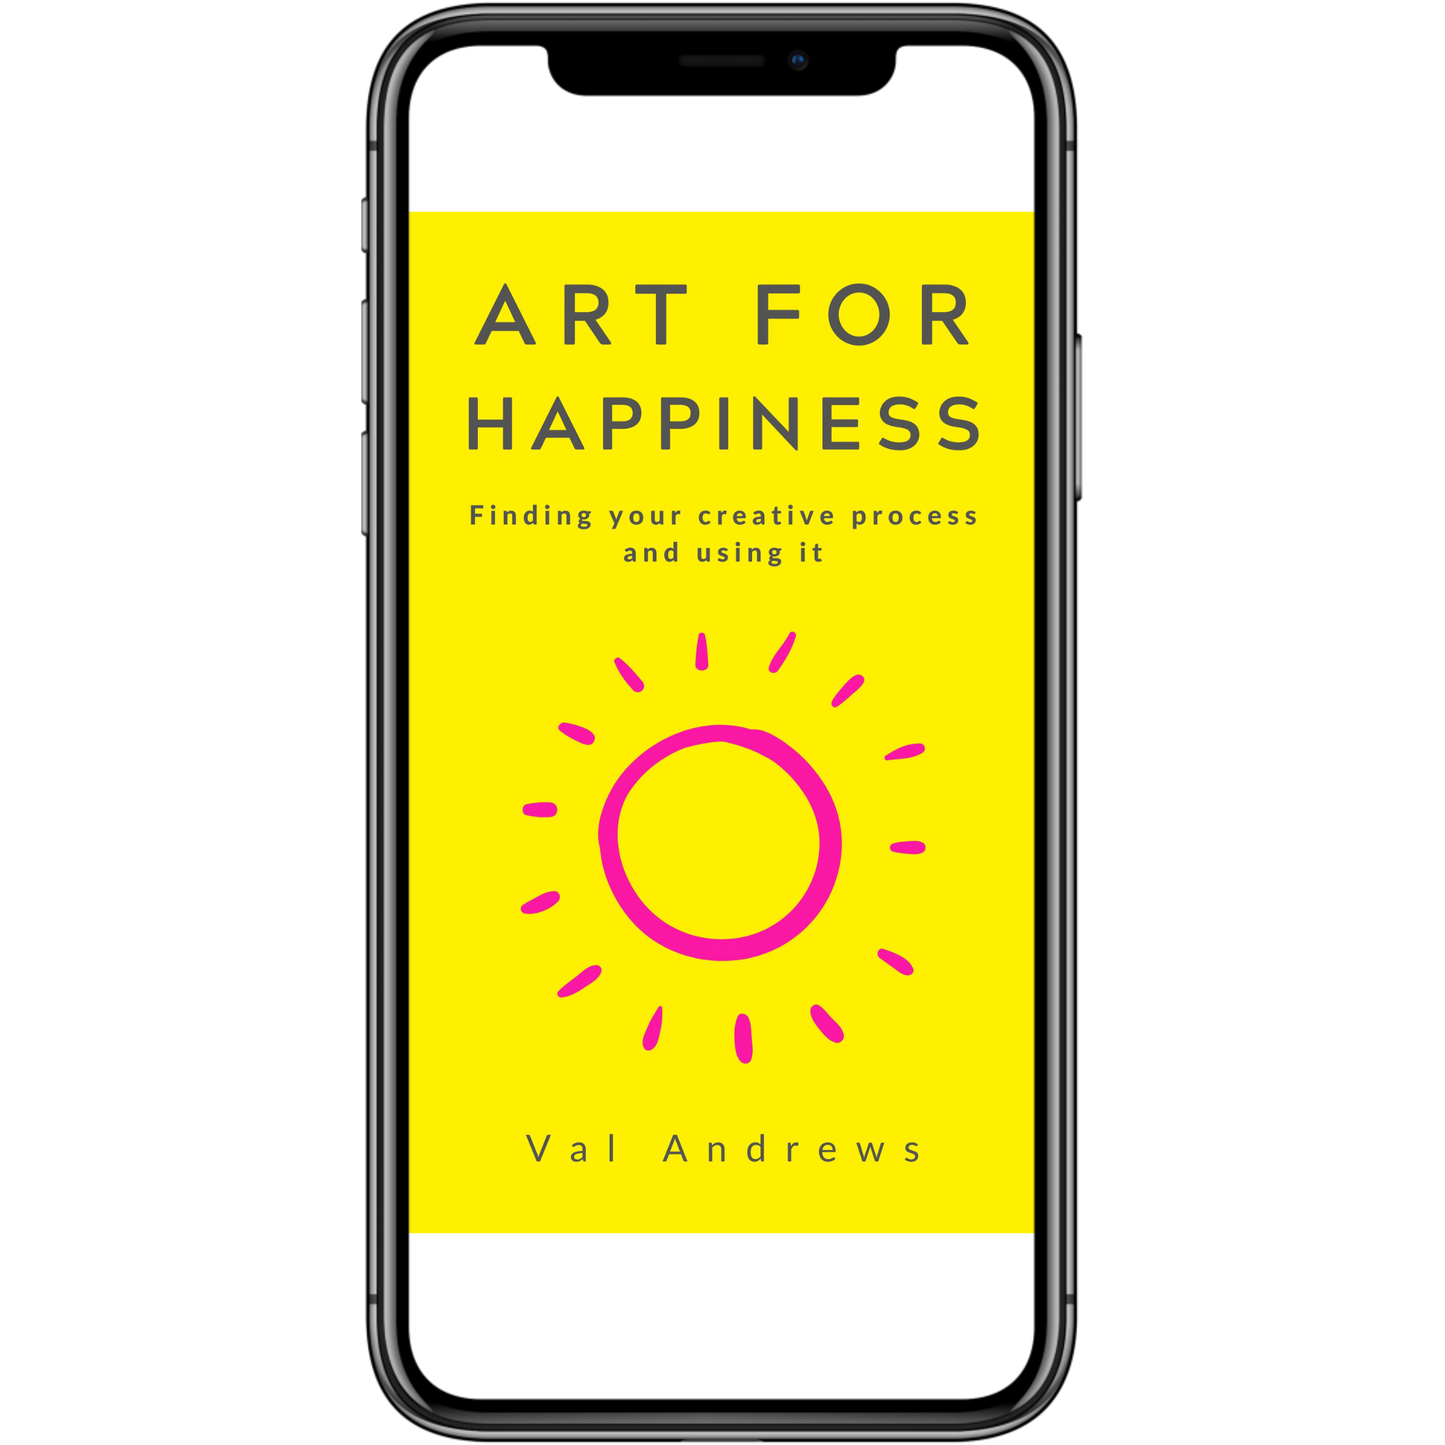 Art for Happiness: Finding your creative process and using it